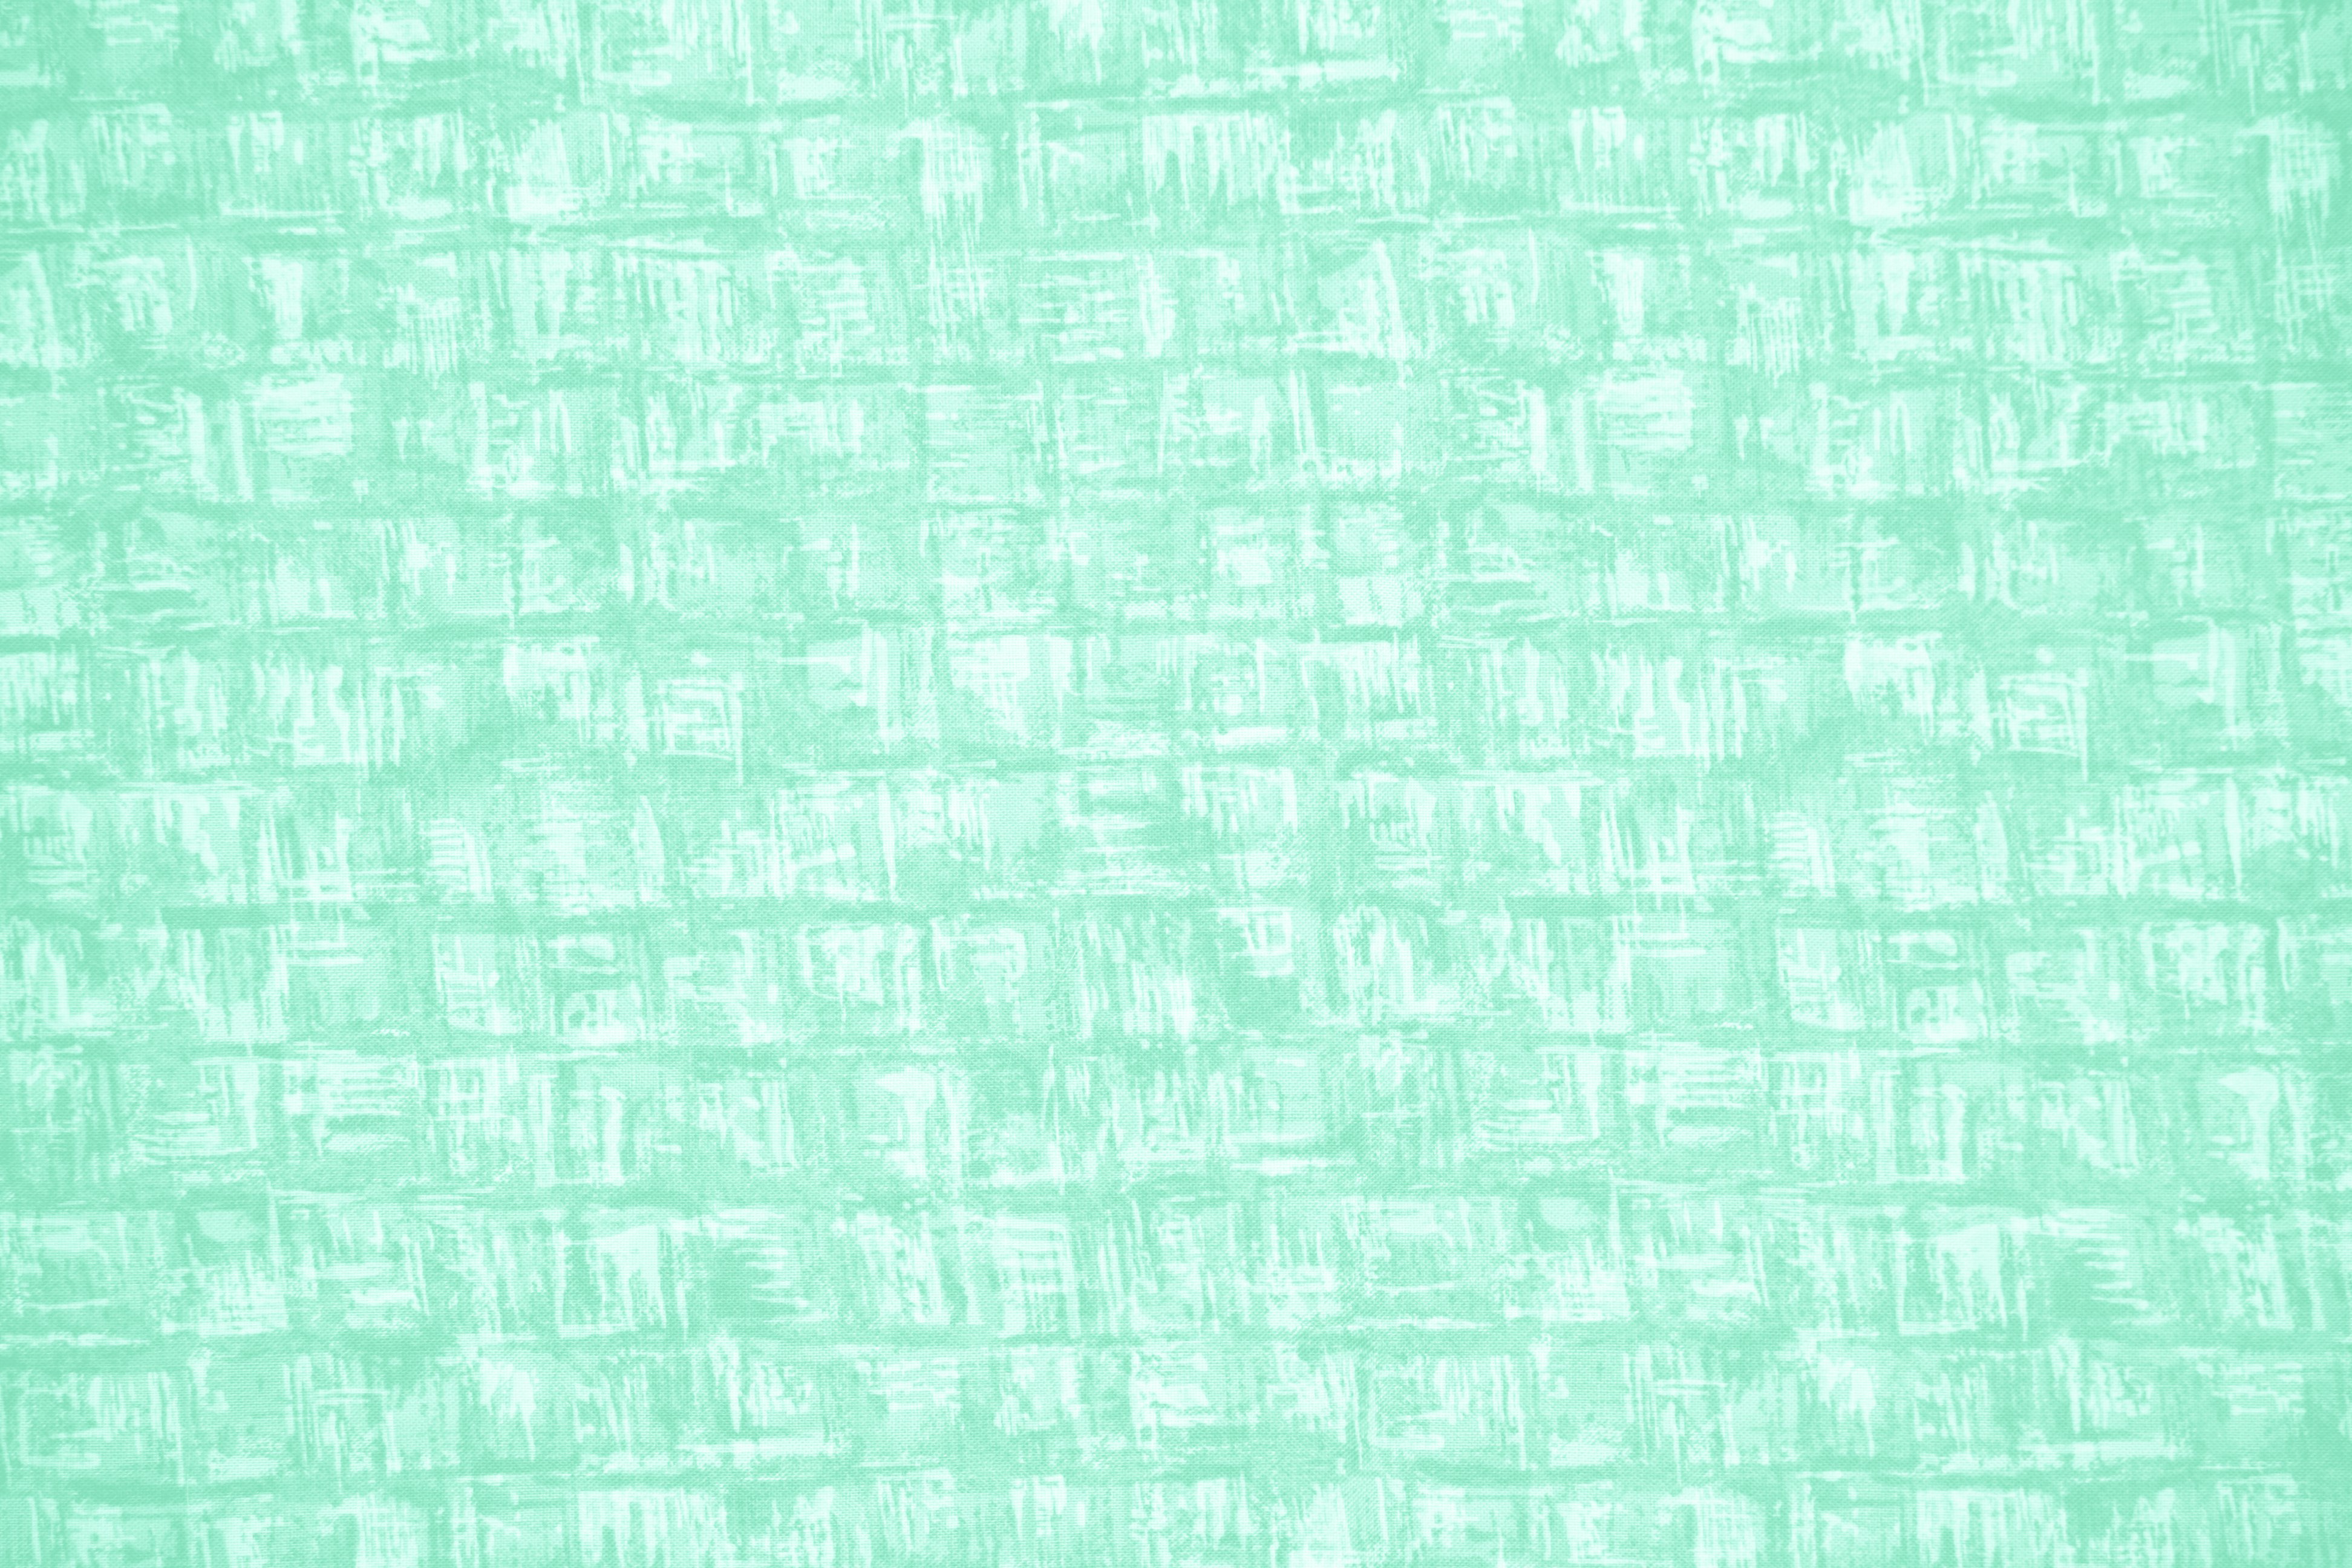 Mint Green Abstract Squares Fabric Texture Picture. Free Photograph. Photo Public Domain